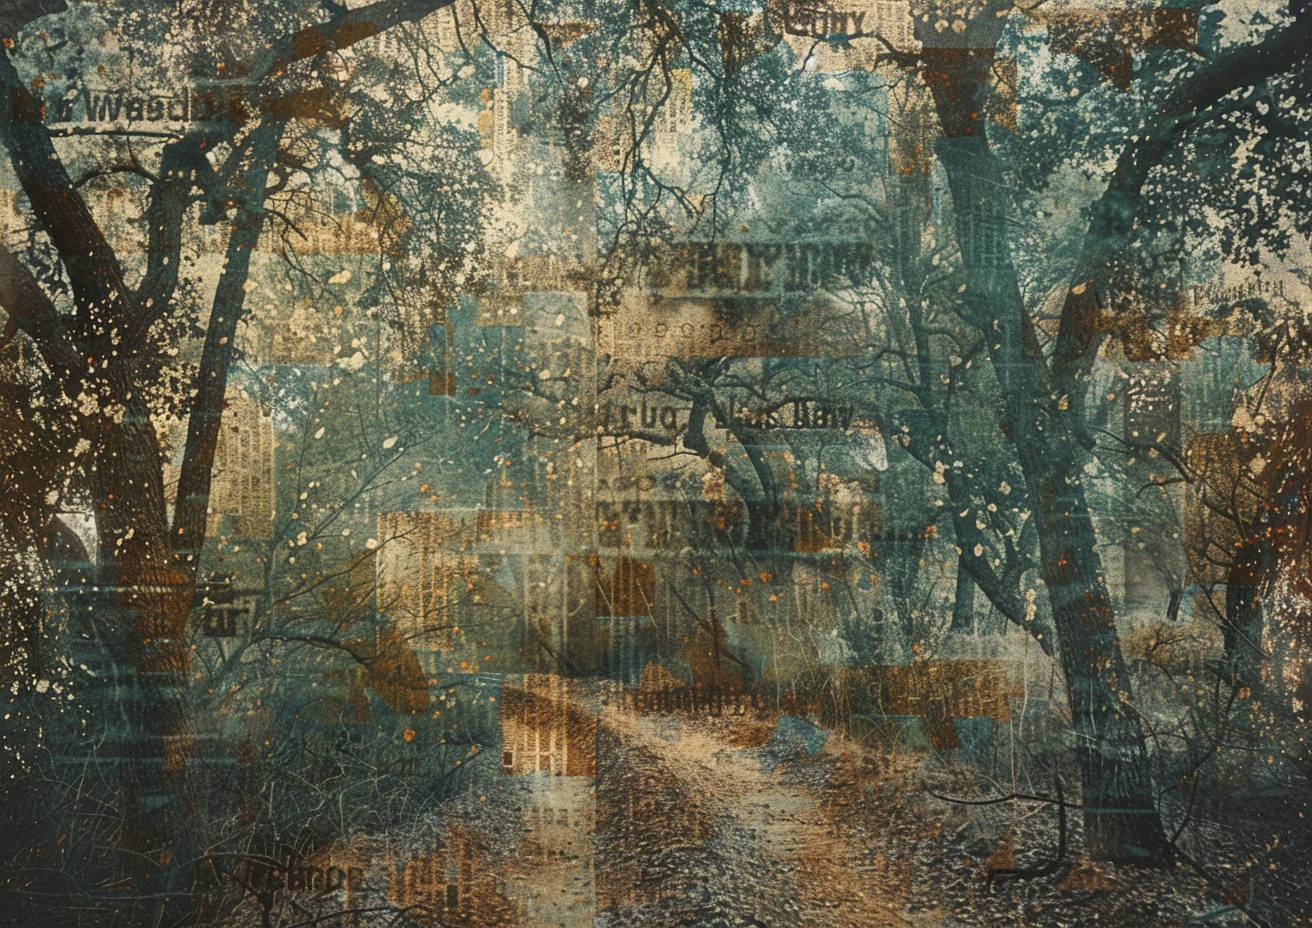 abstract layered silkscreen print, a lonely trail winds through an oak forest, diffuse sunshine, dark and misty from the rain, fragmented and distorted rectangles, large letters stencil overlay, low contrast palette, rough texture, flat image